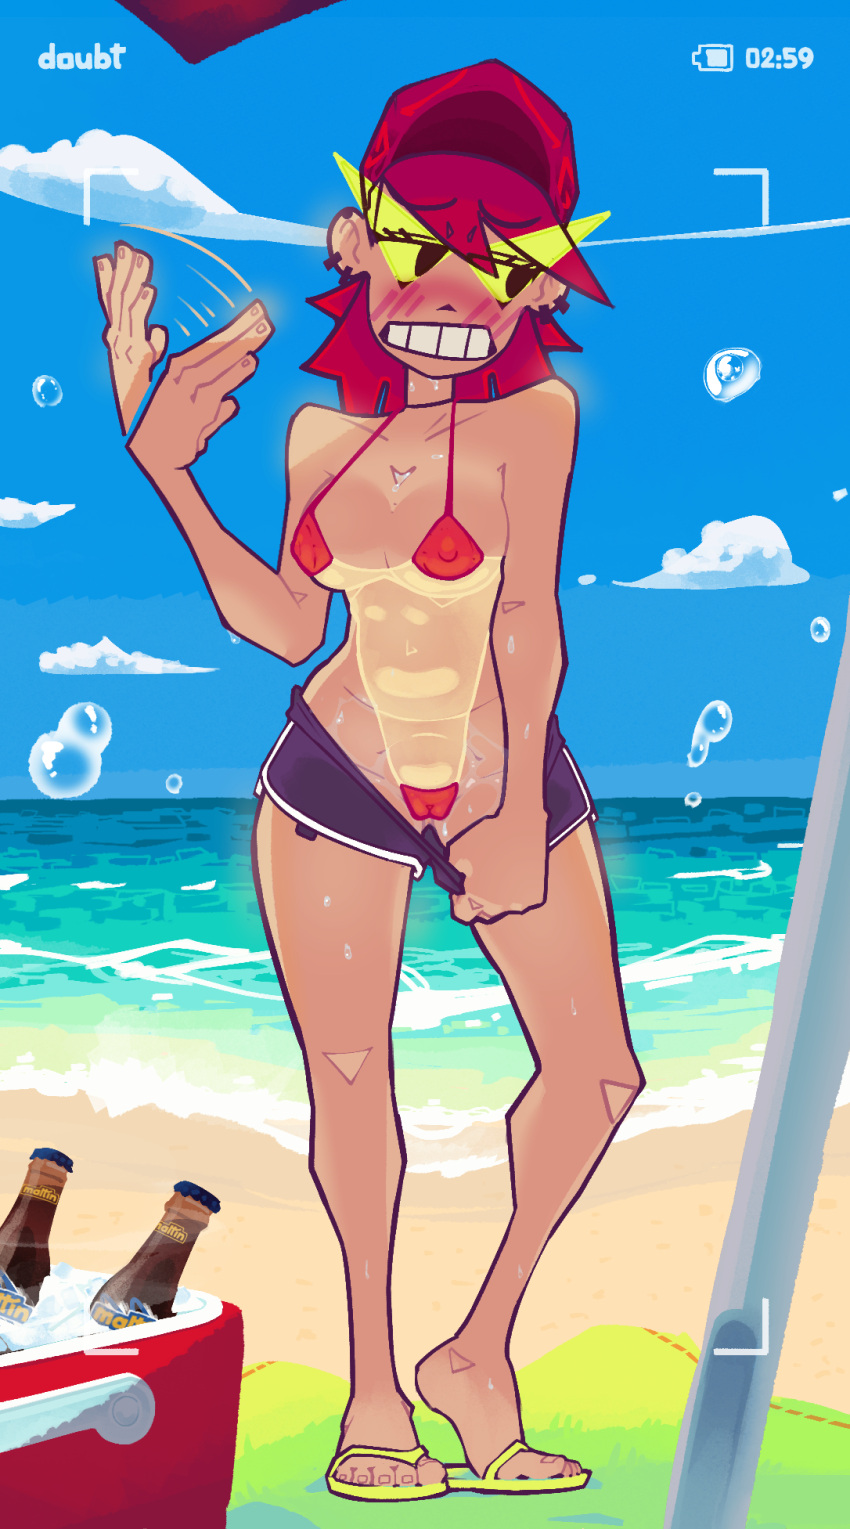 1girl beach blush breasts cloud doubt_(thedo_ubt) foster's_home_for_imaginary_friends frankie_foster full_body hat highres navel nipples ocean outdoors red_hair sand sandals shorts sky solo summer sweat swimsuit